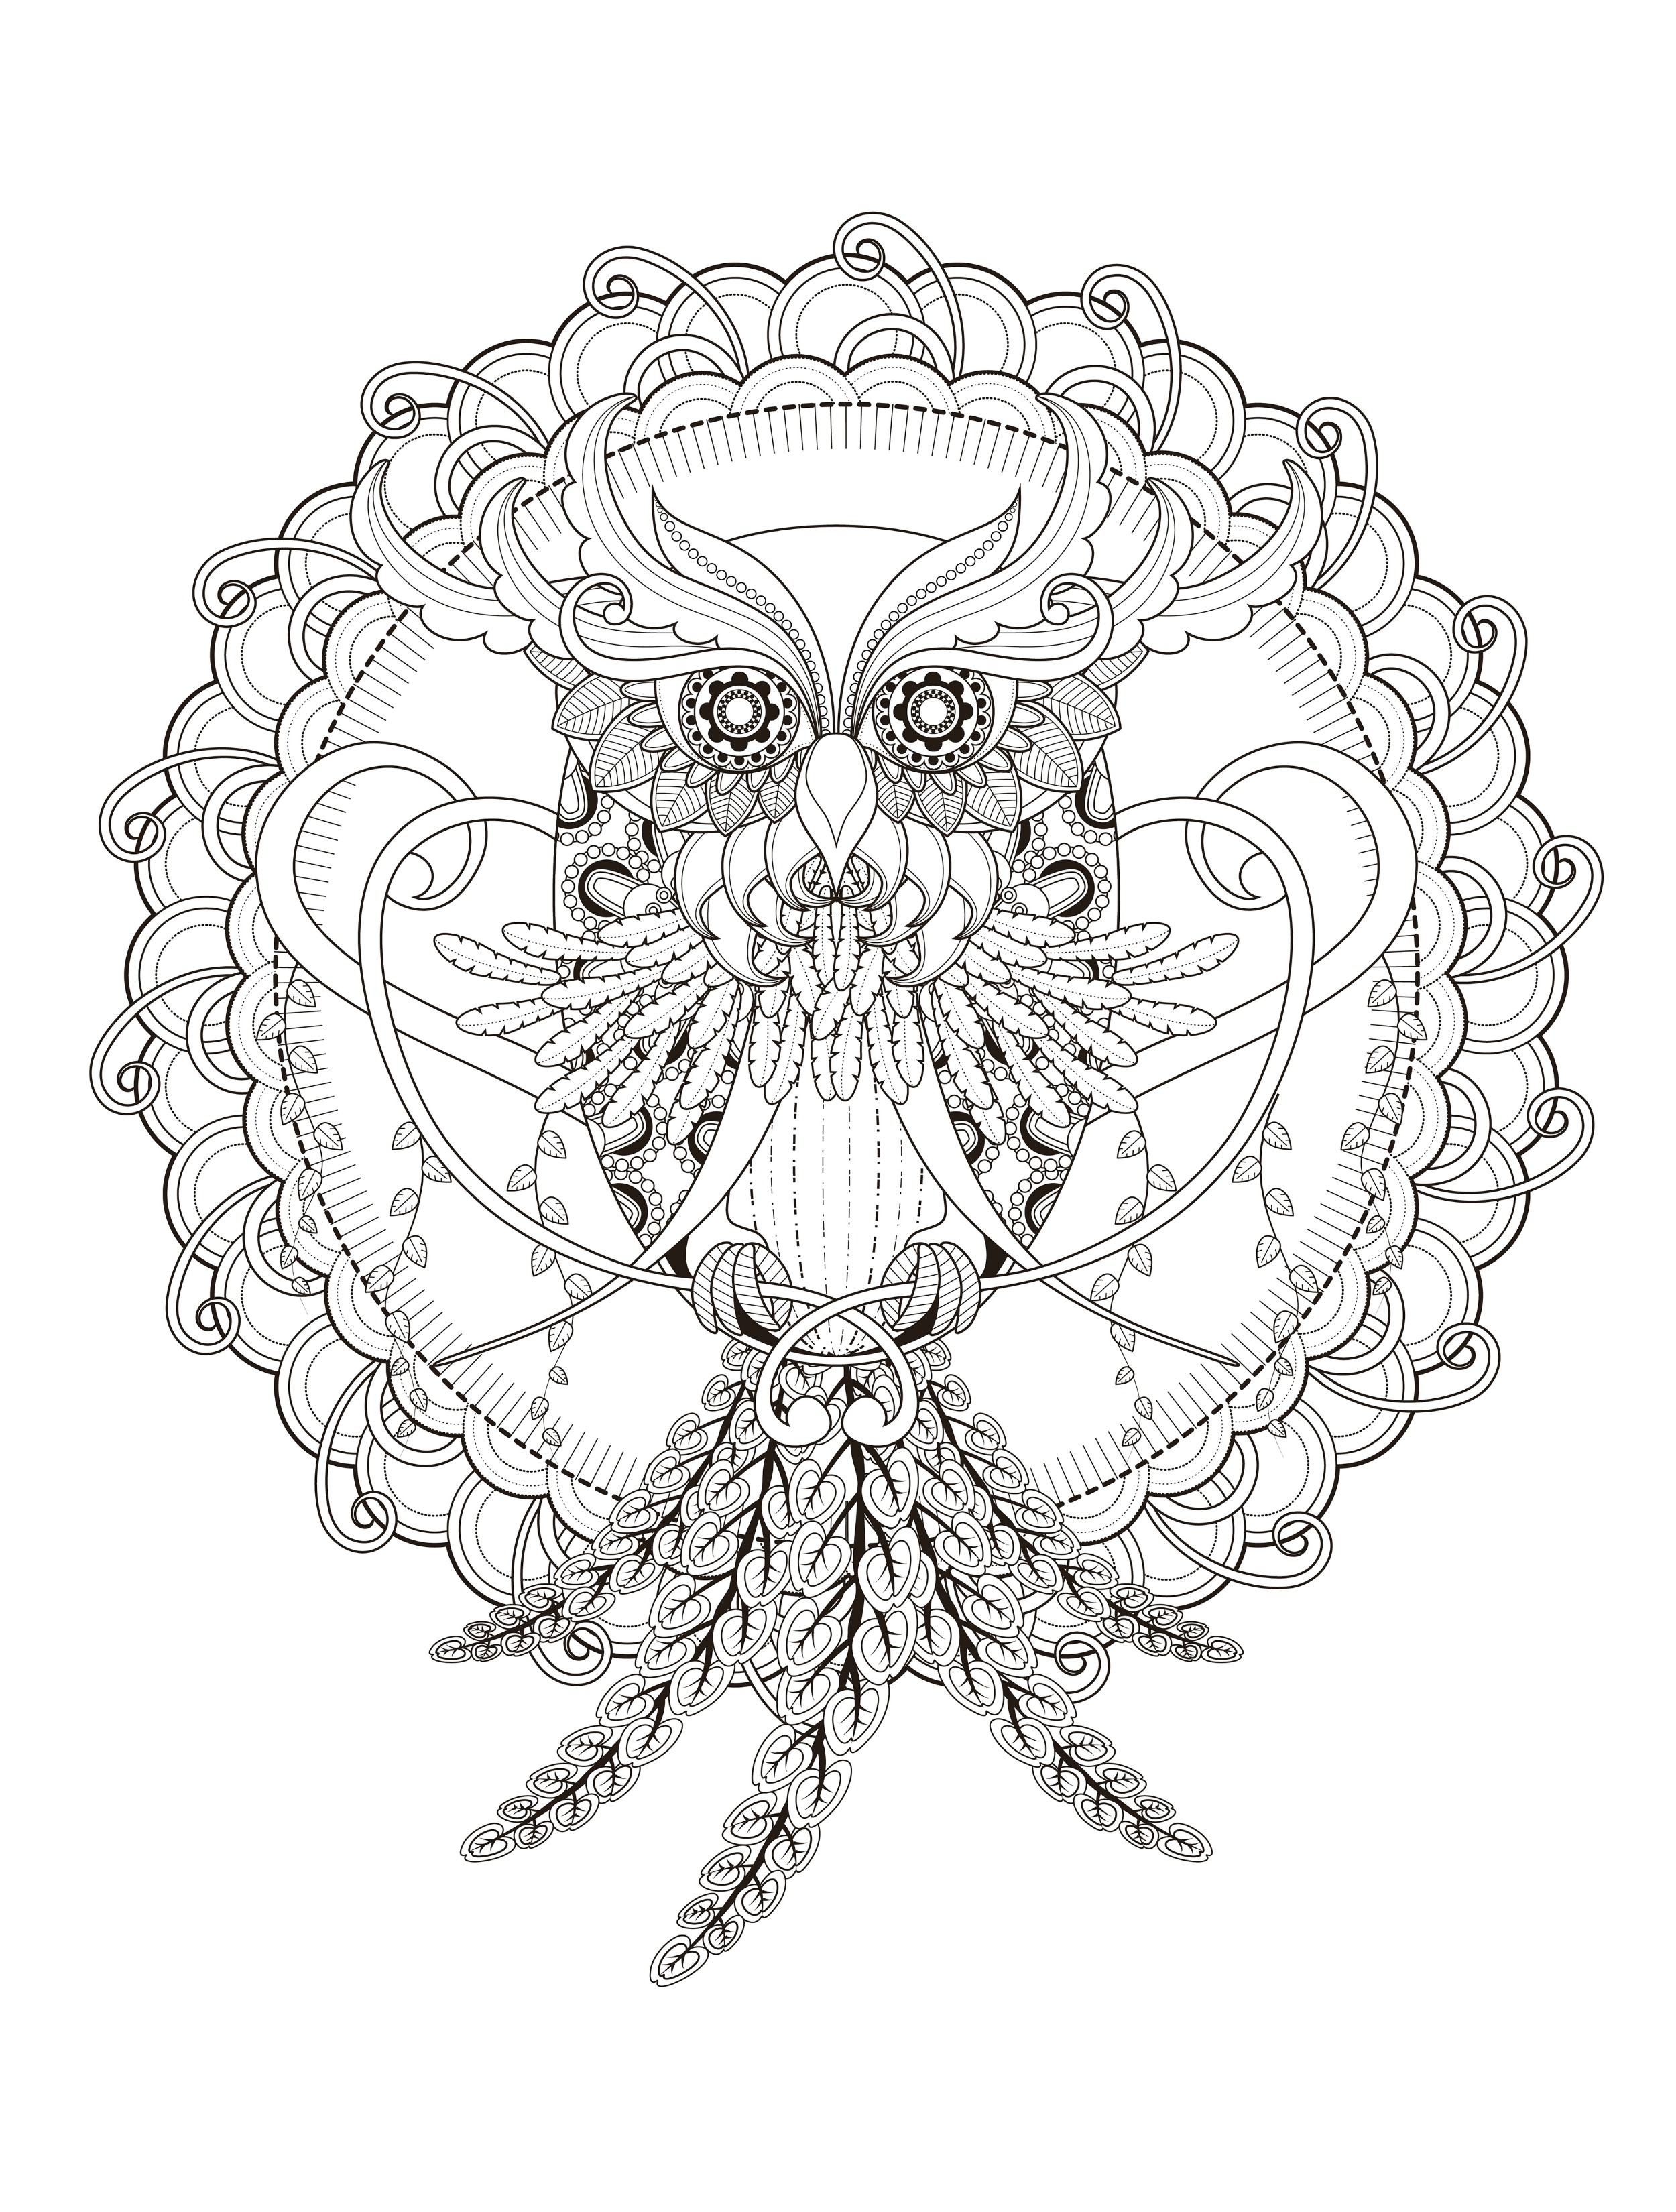 Owl coloring page for adults